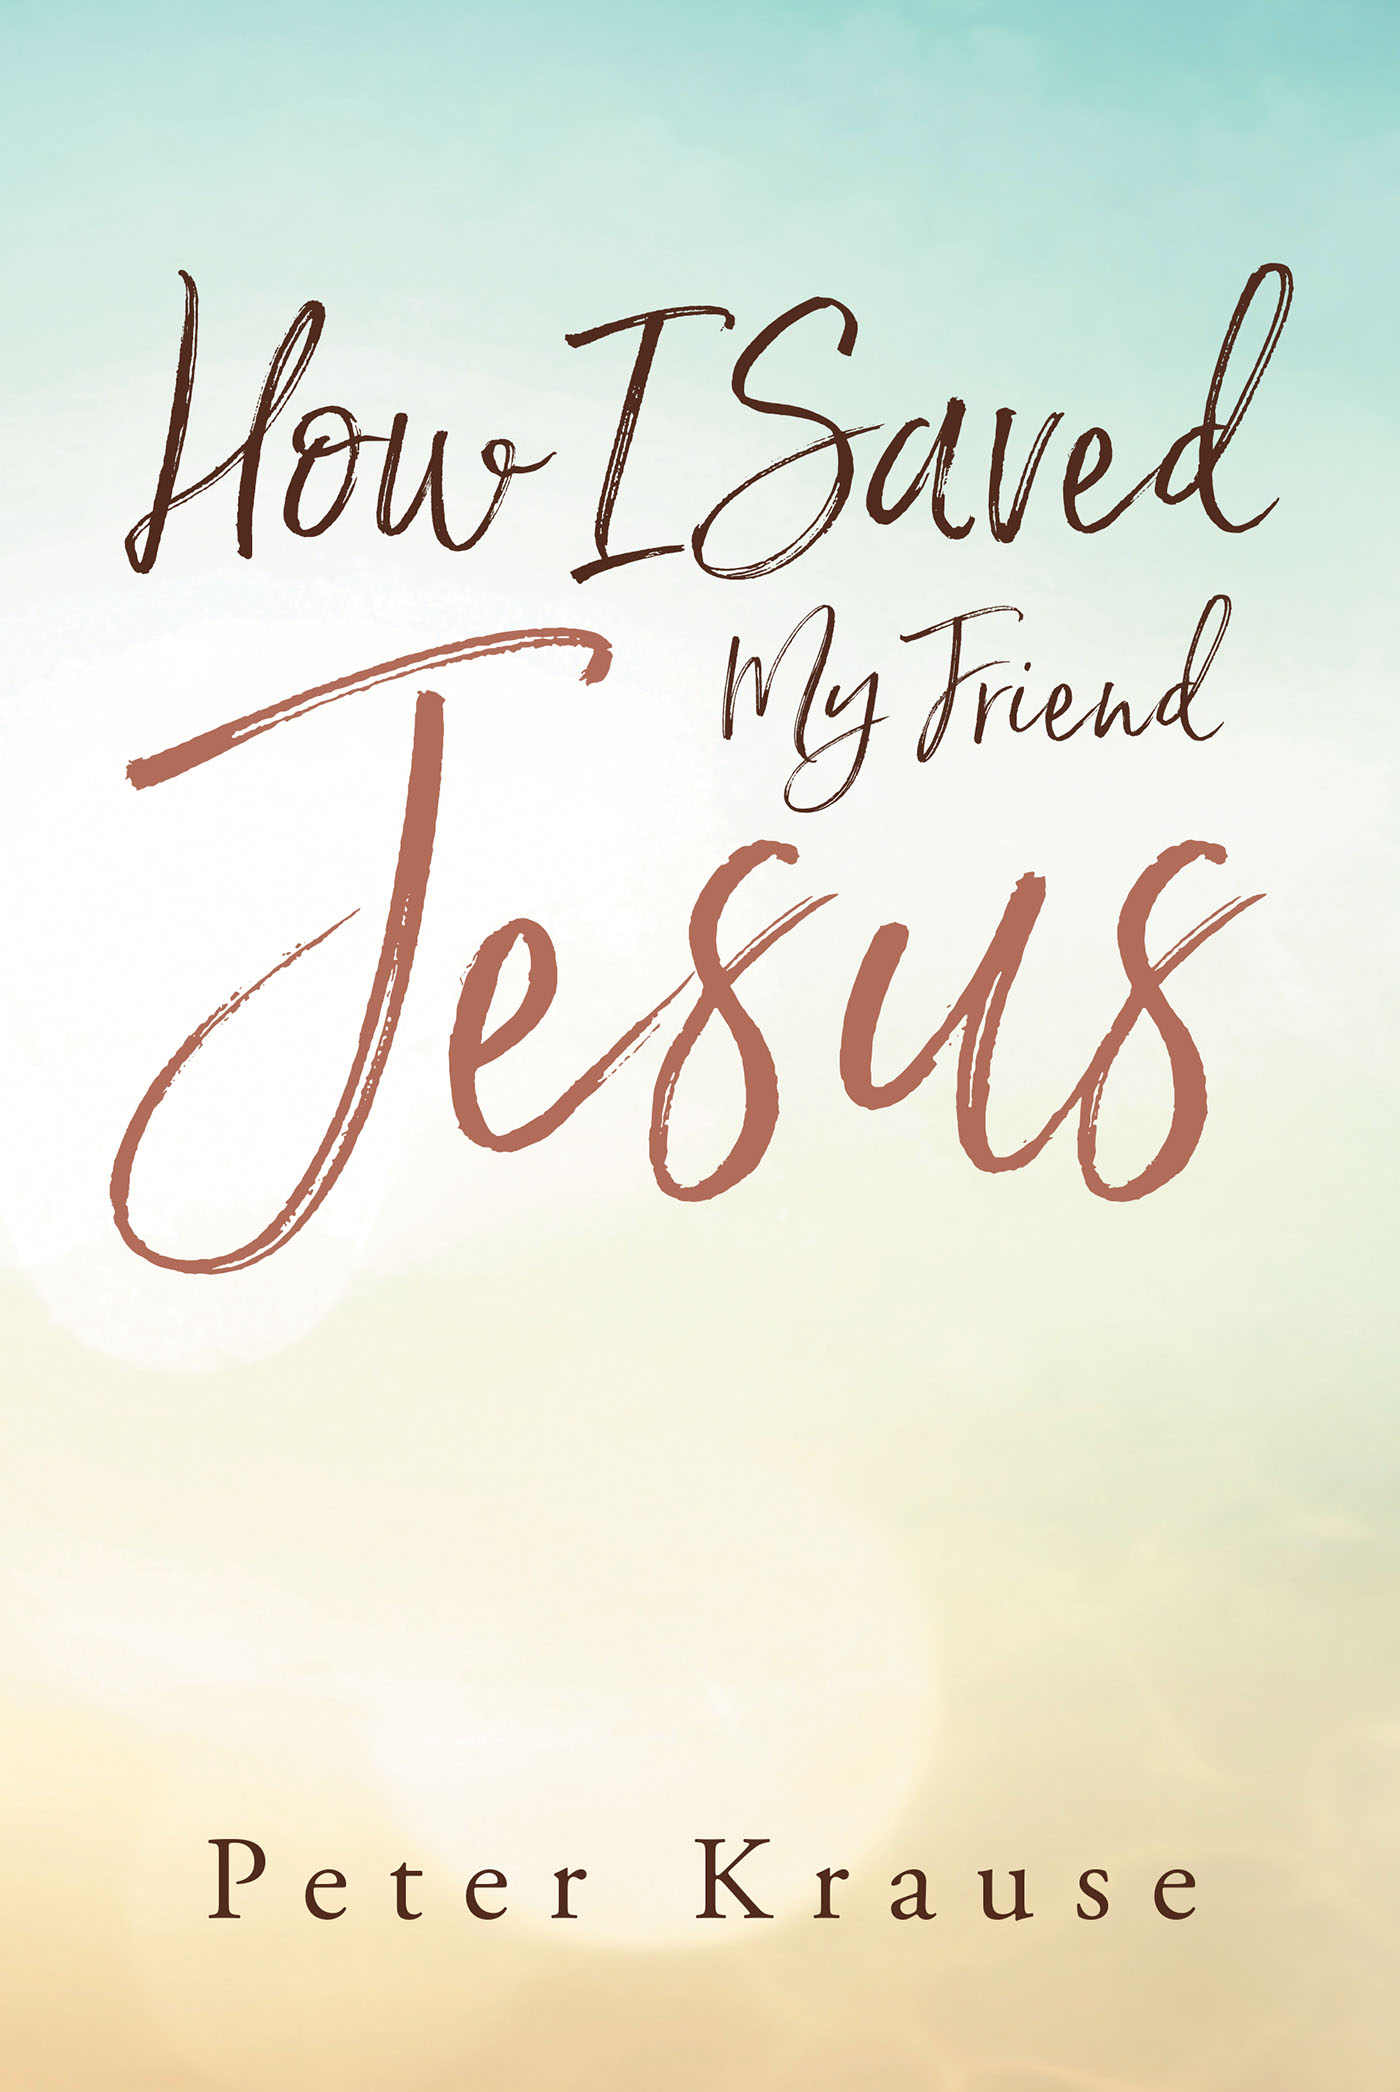 Peter Krause’s Newly Released "How I Saved My Friend Jesus" is a Thought-Provoking Exploration of Faith and Science